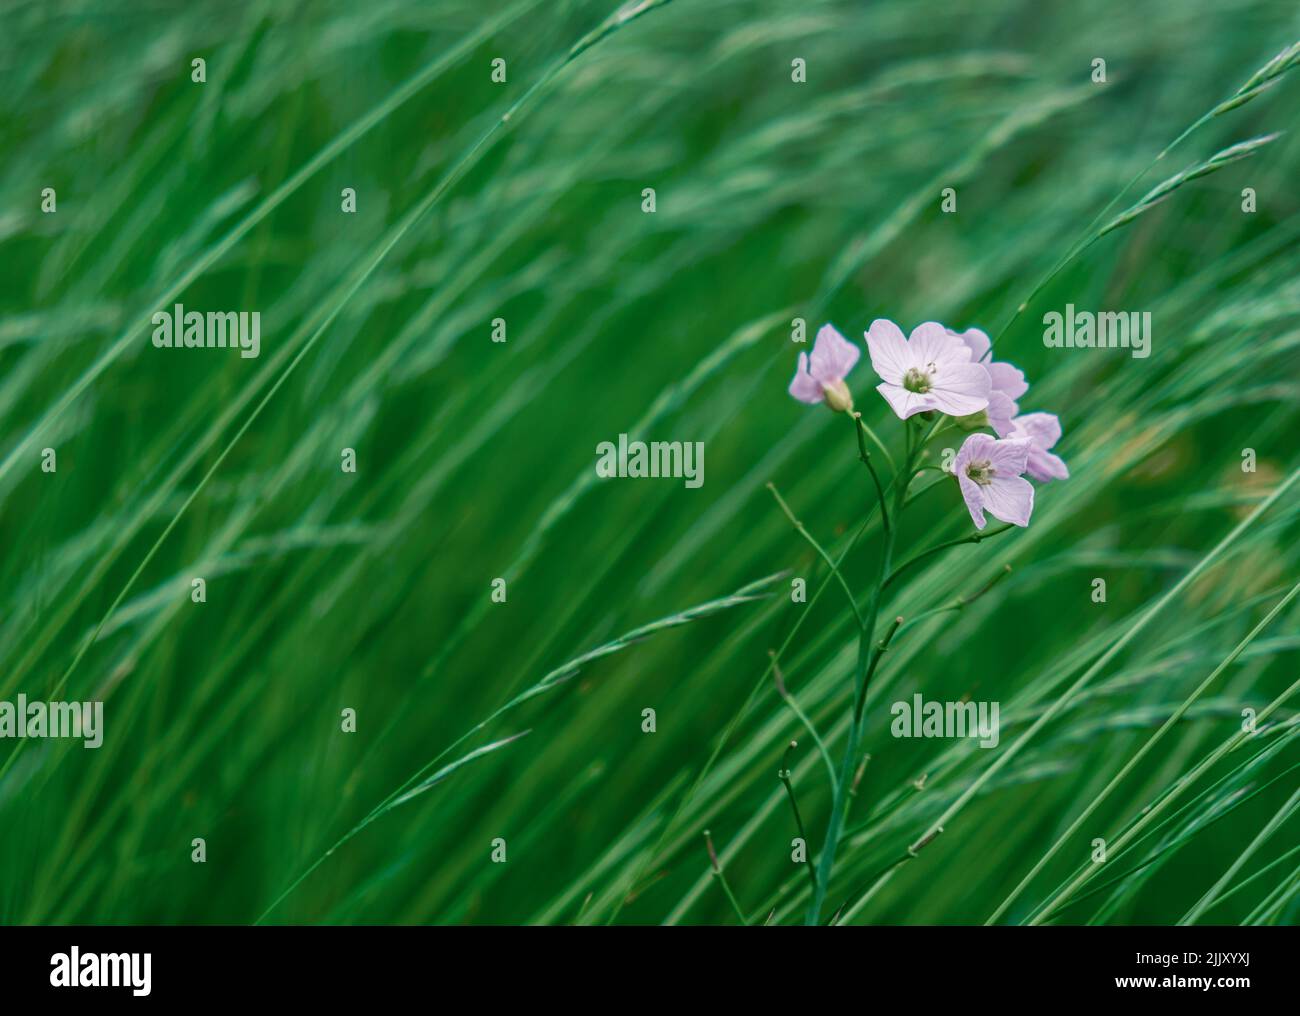 Delicate Lilac Wildflower In Long Grass With Copy Space Stock Photo